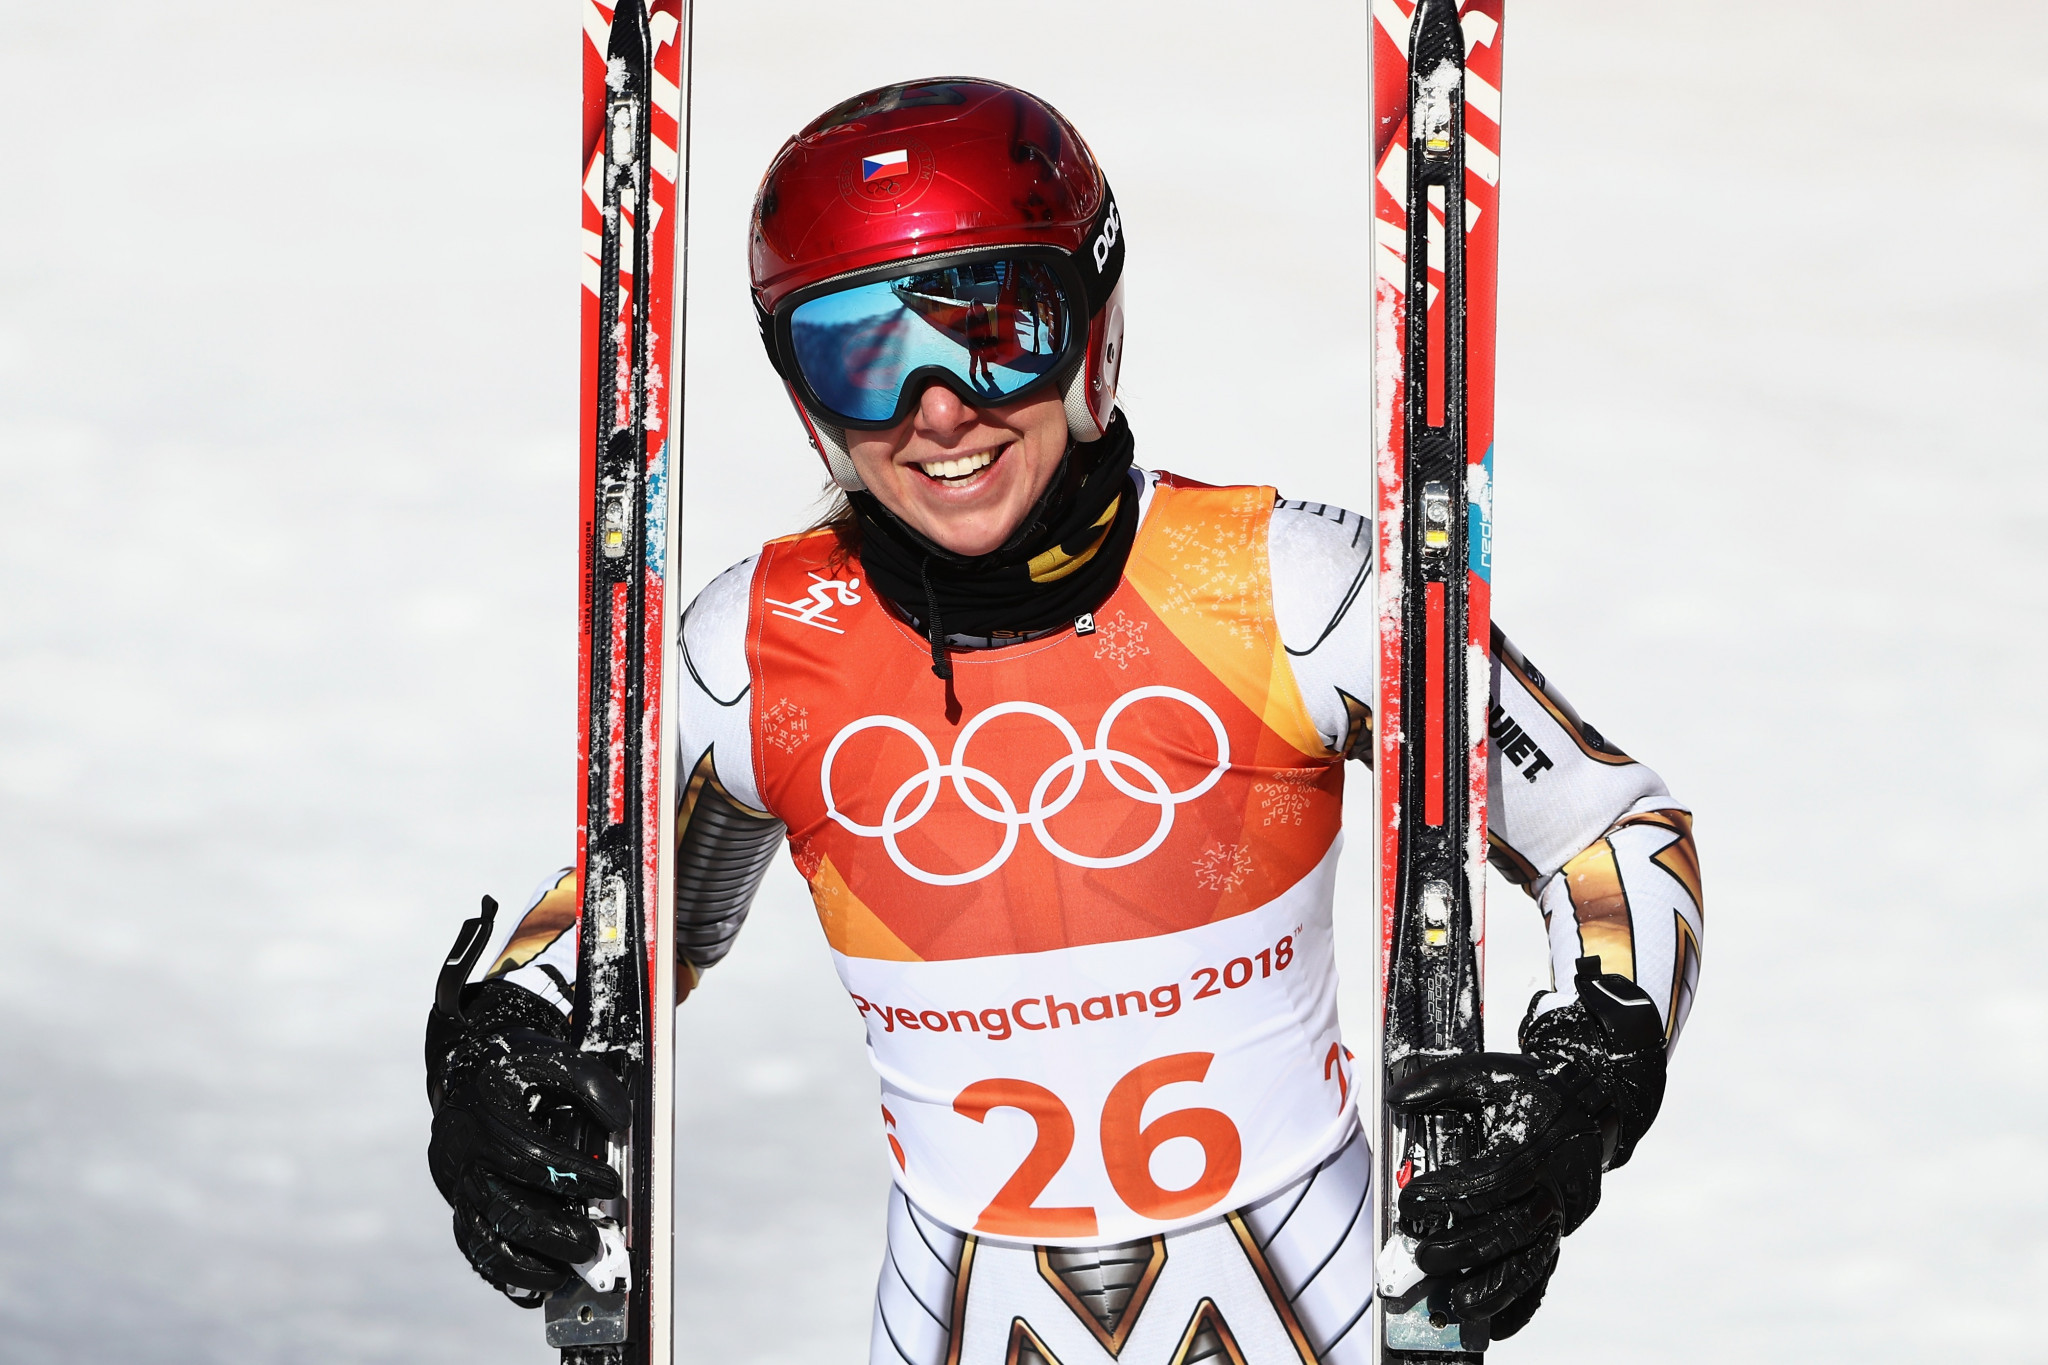 Snowboard specialist defies all odds to deny Veith defence of women's super-G Olympic title at Pyeongchang 2018